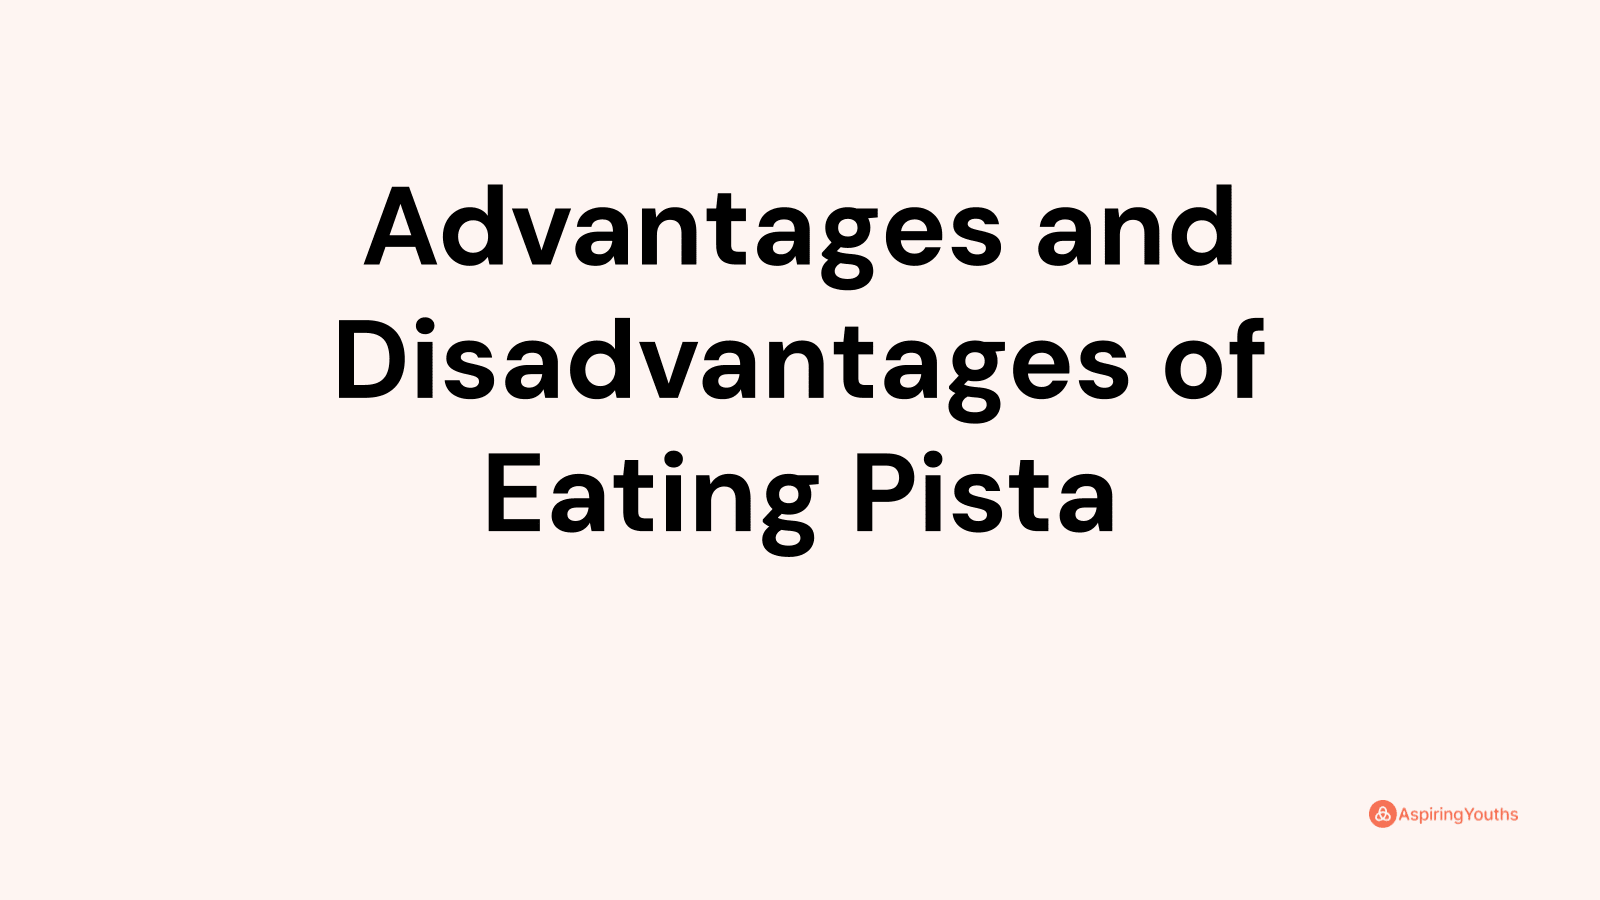 Advantages and disadvantages of Eating Pista